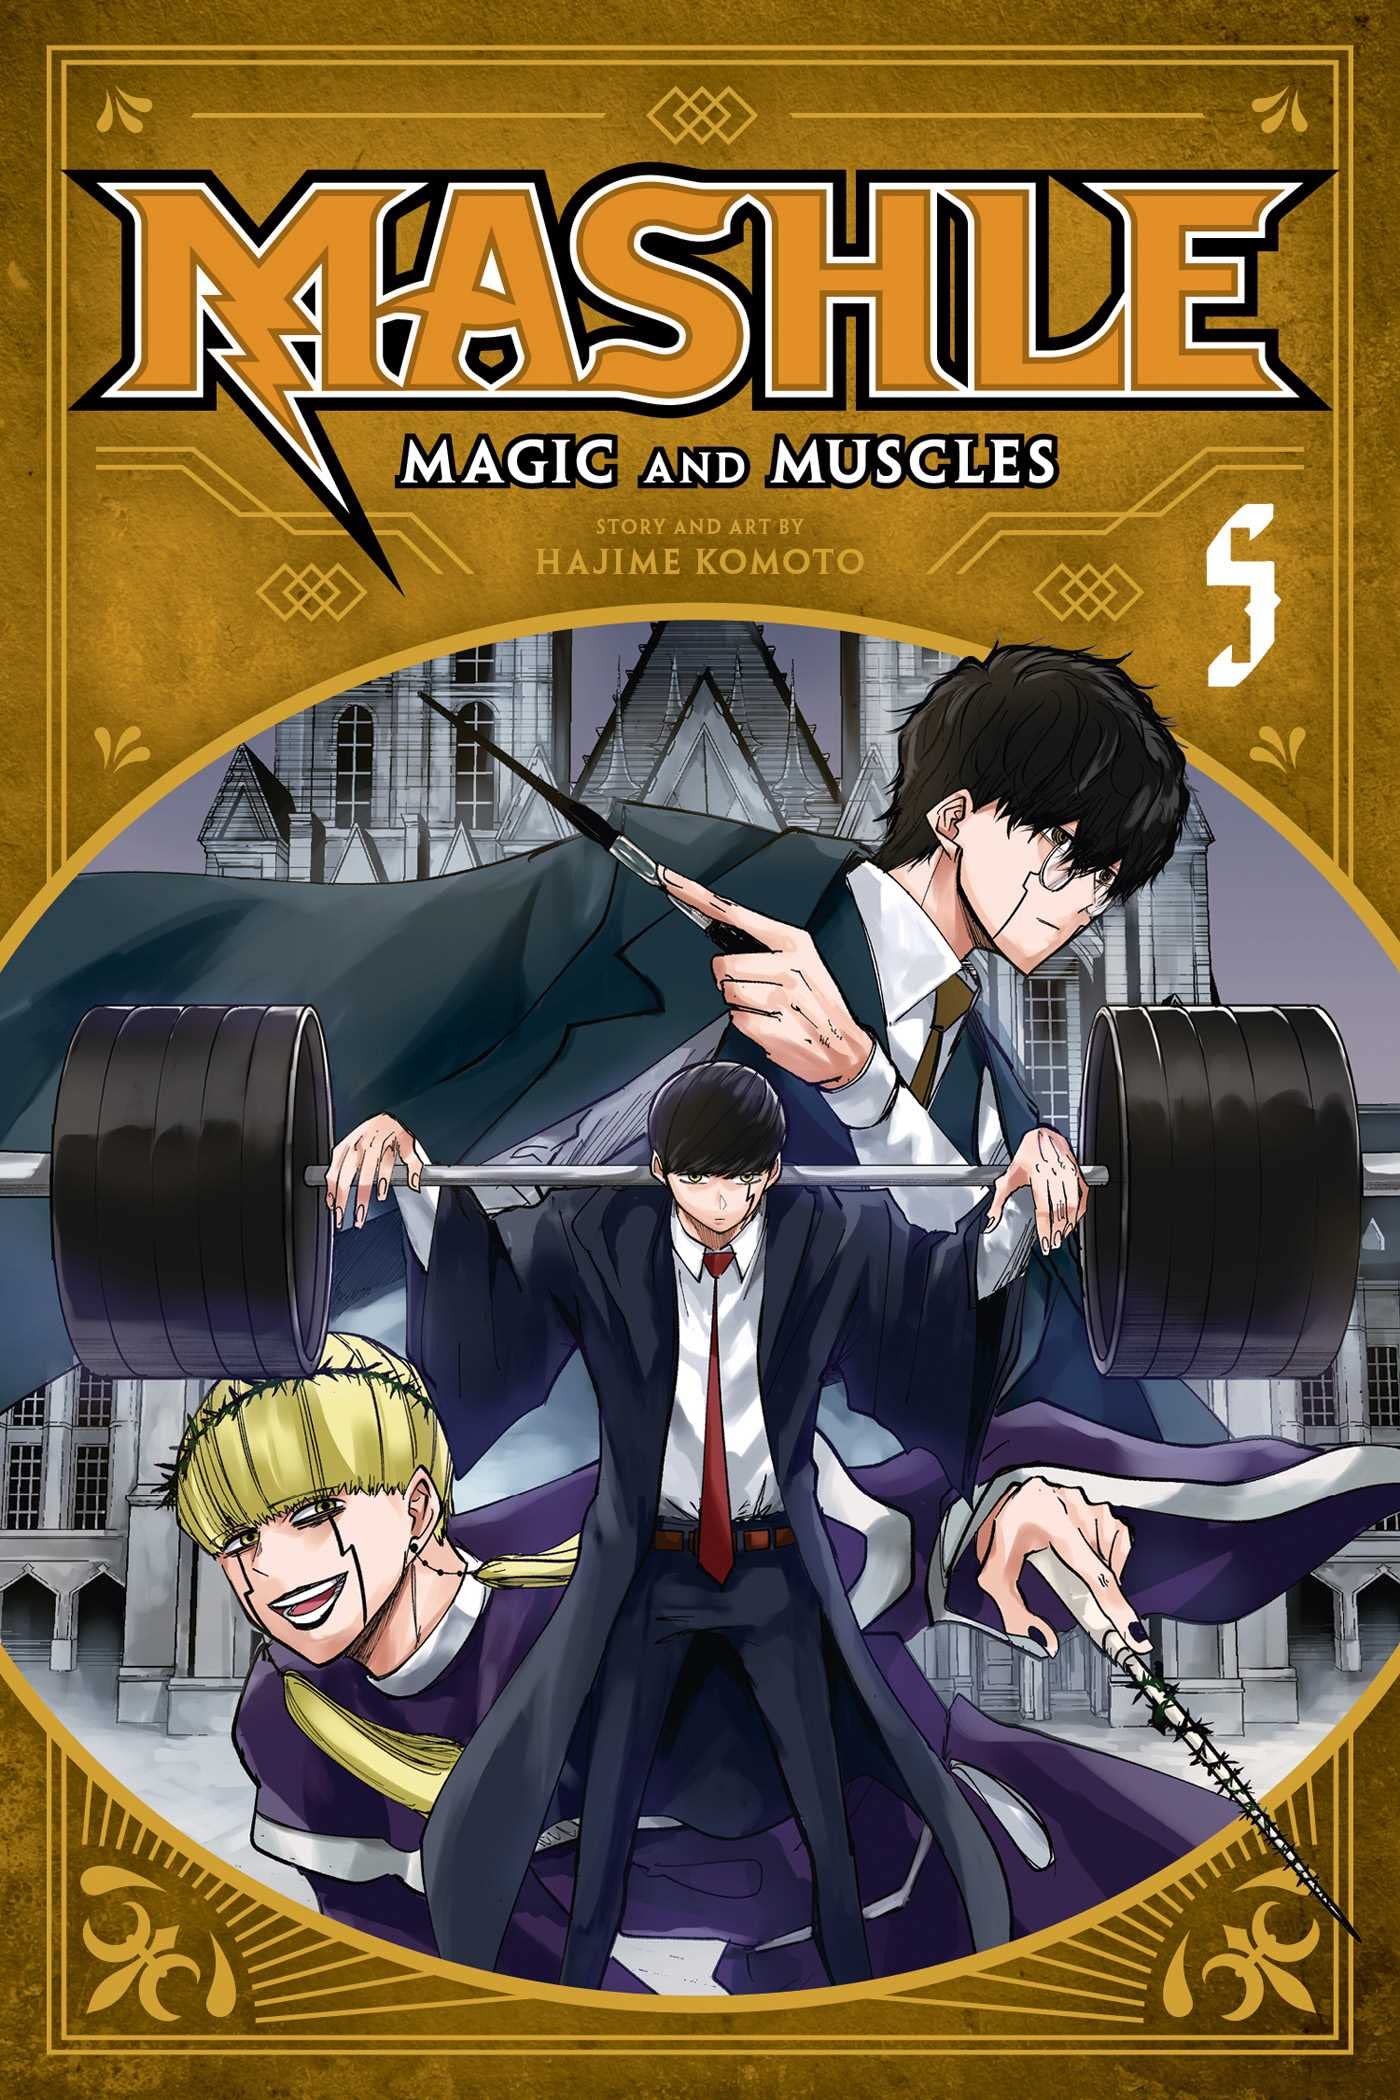 Mashle: Magic and Muscles episode 5: Release date and time, what to expect,  and more